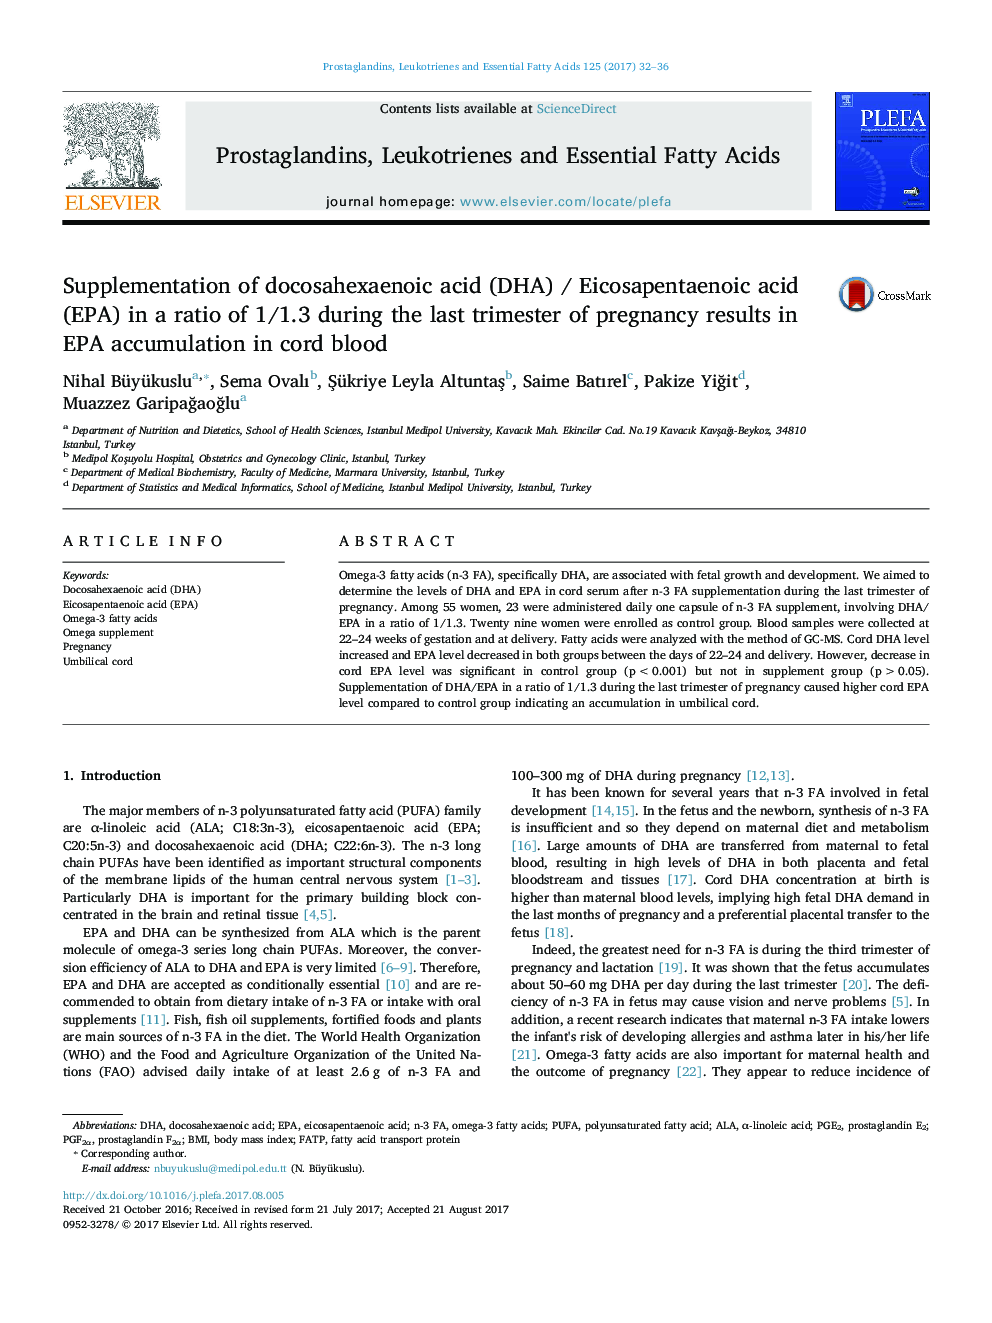 Supplementation of docosahexaenoic acid (DHA) / Eicosapentaenoic acid (EPA) in a ratio of 1/1.3 during the last trimester of pregnancy results in EPA accumulation in cord blood